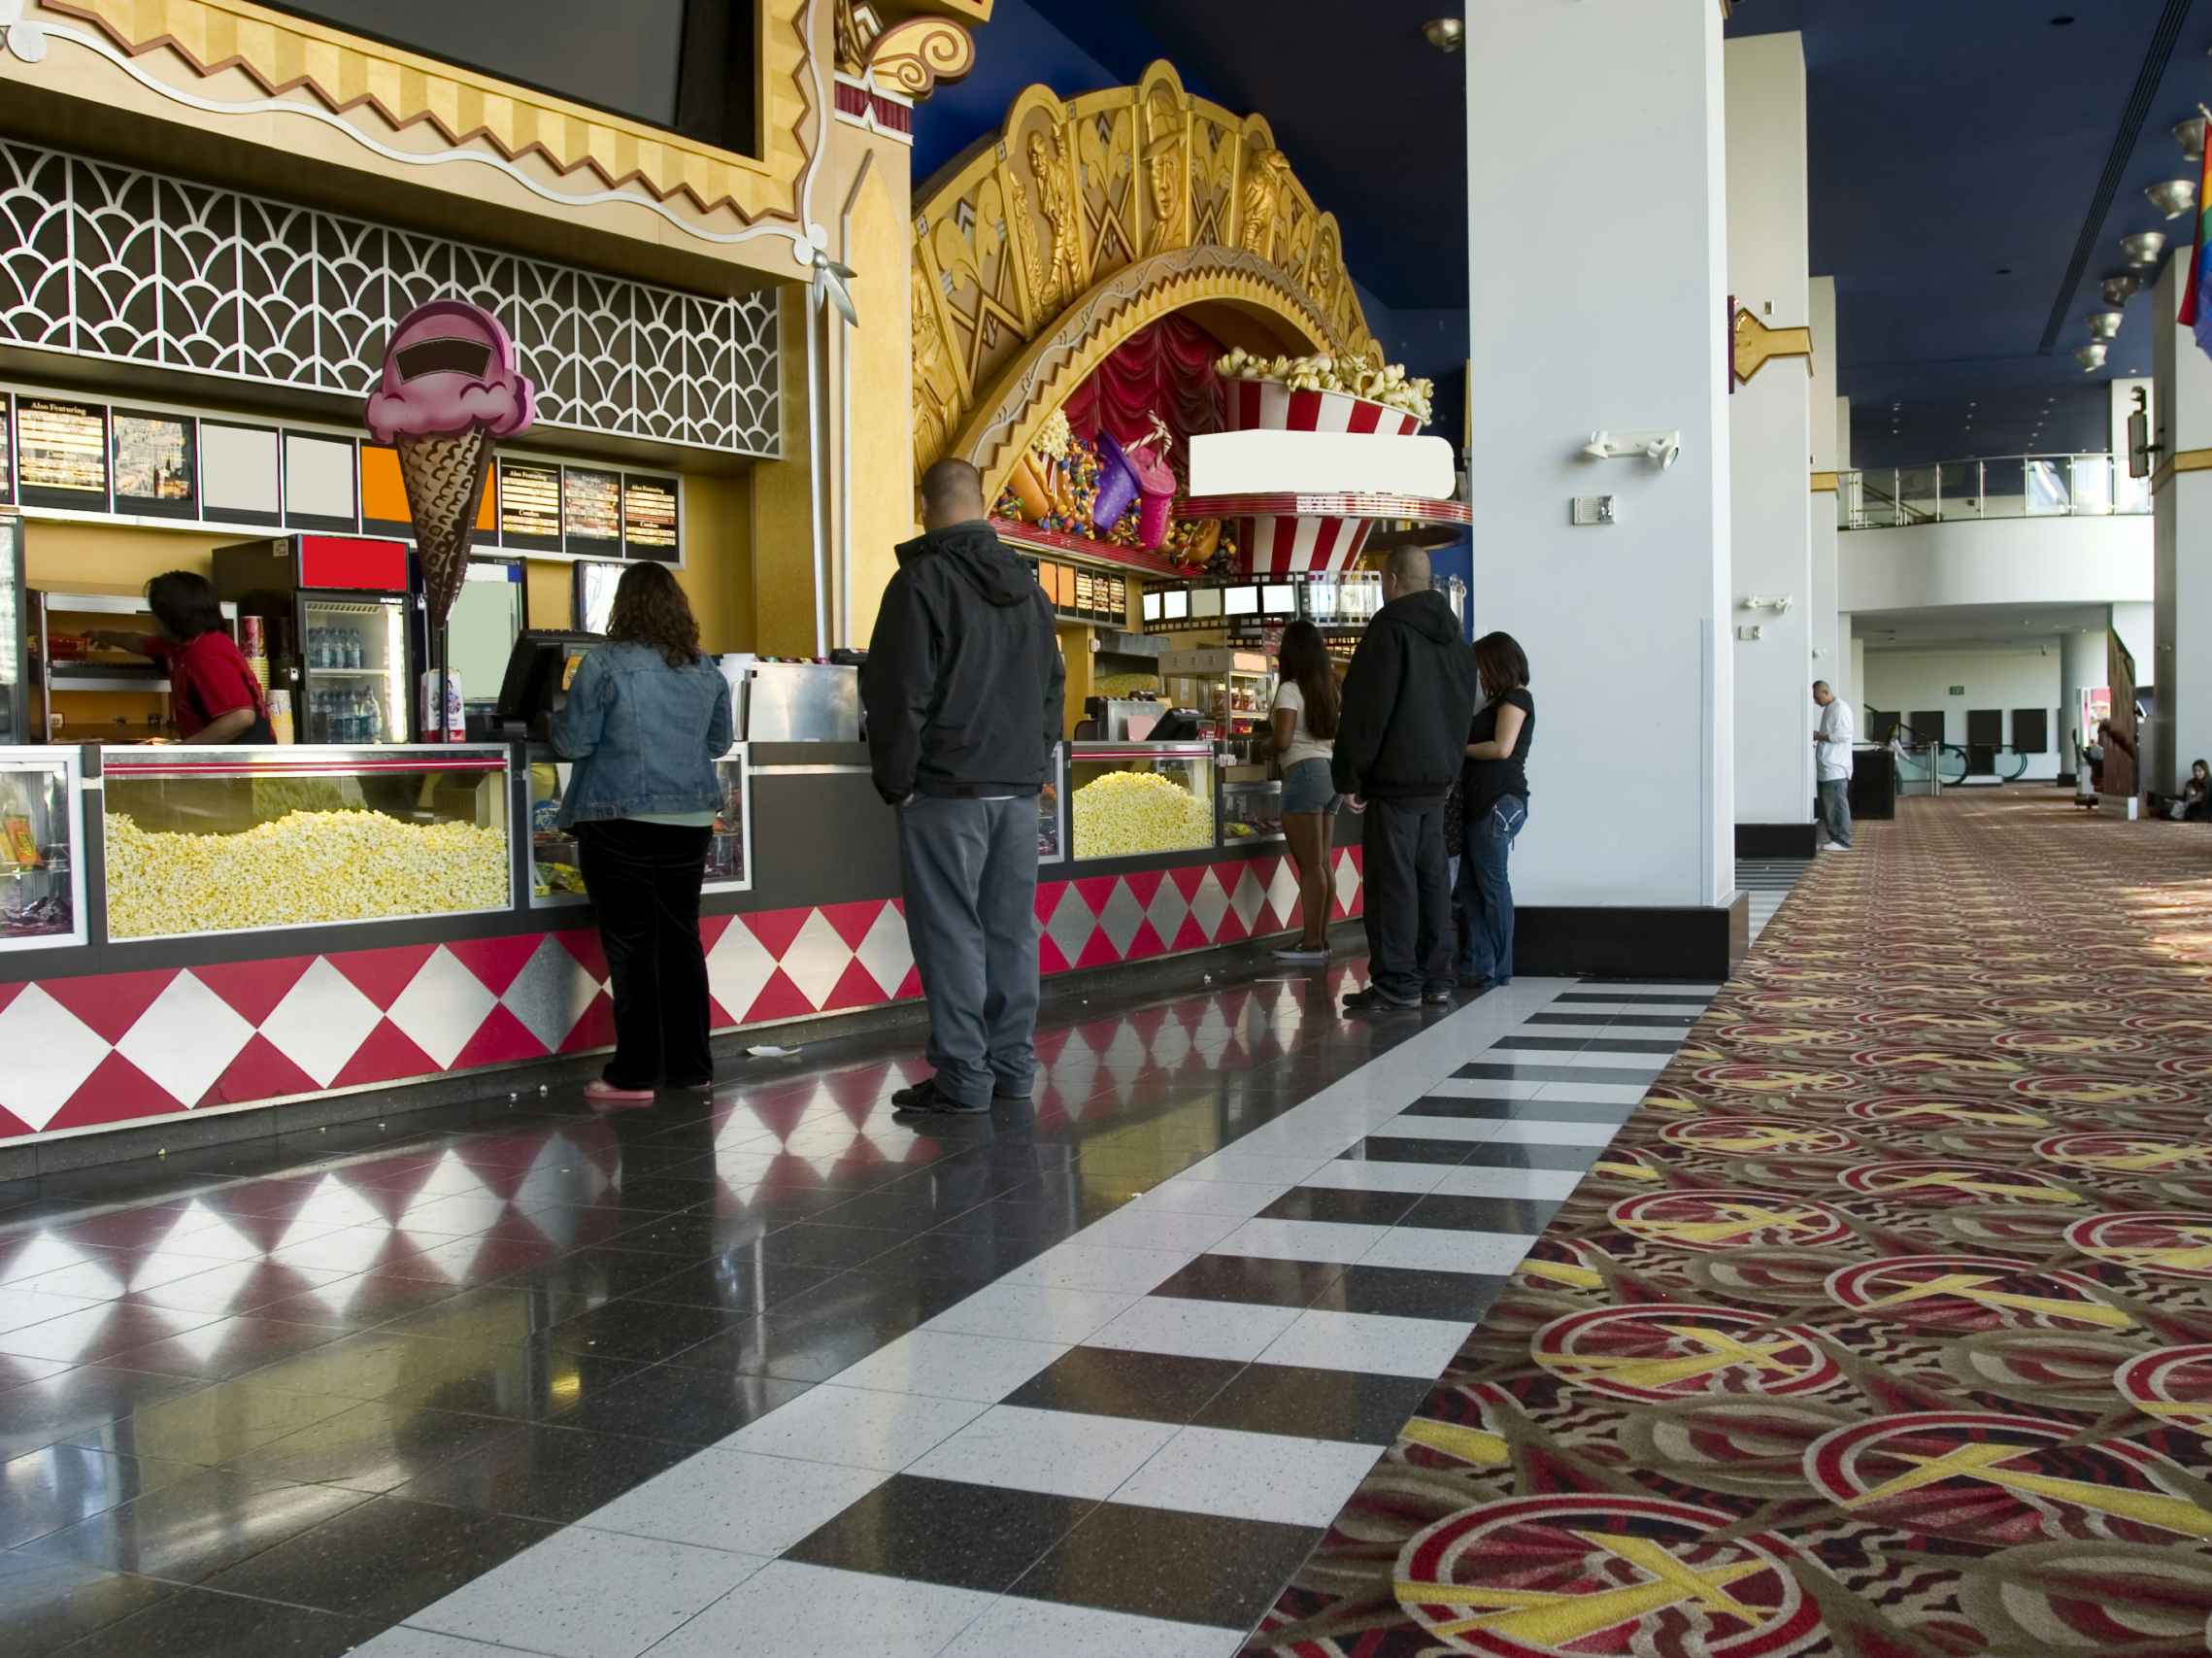 Snack bar at a movie theater in San Francisco